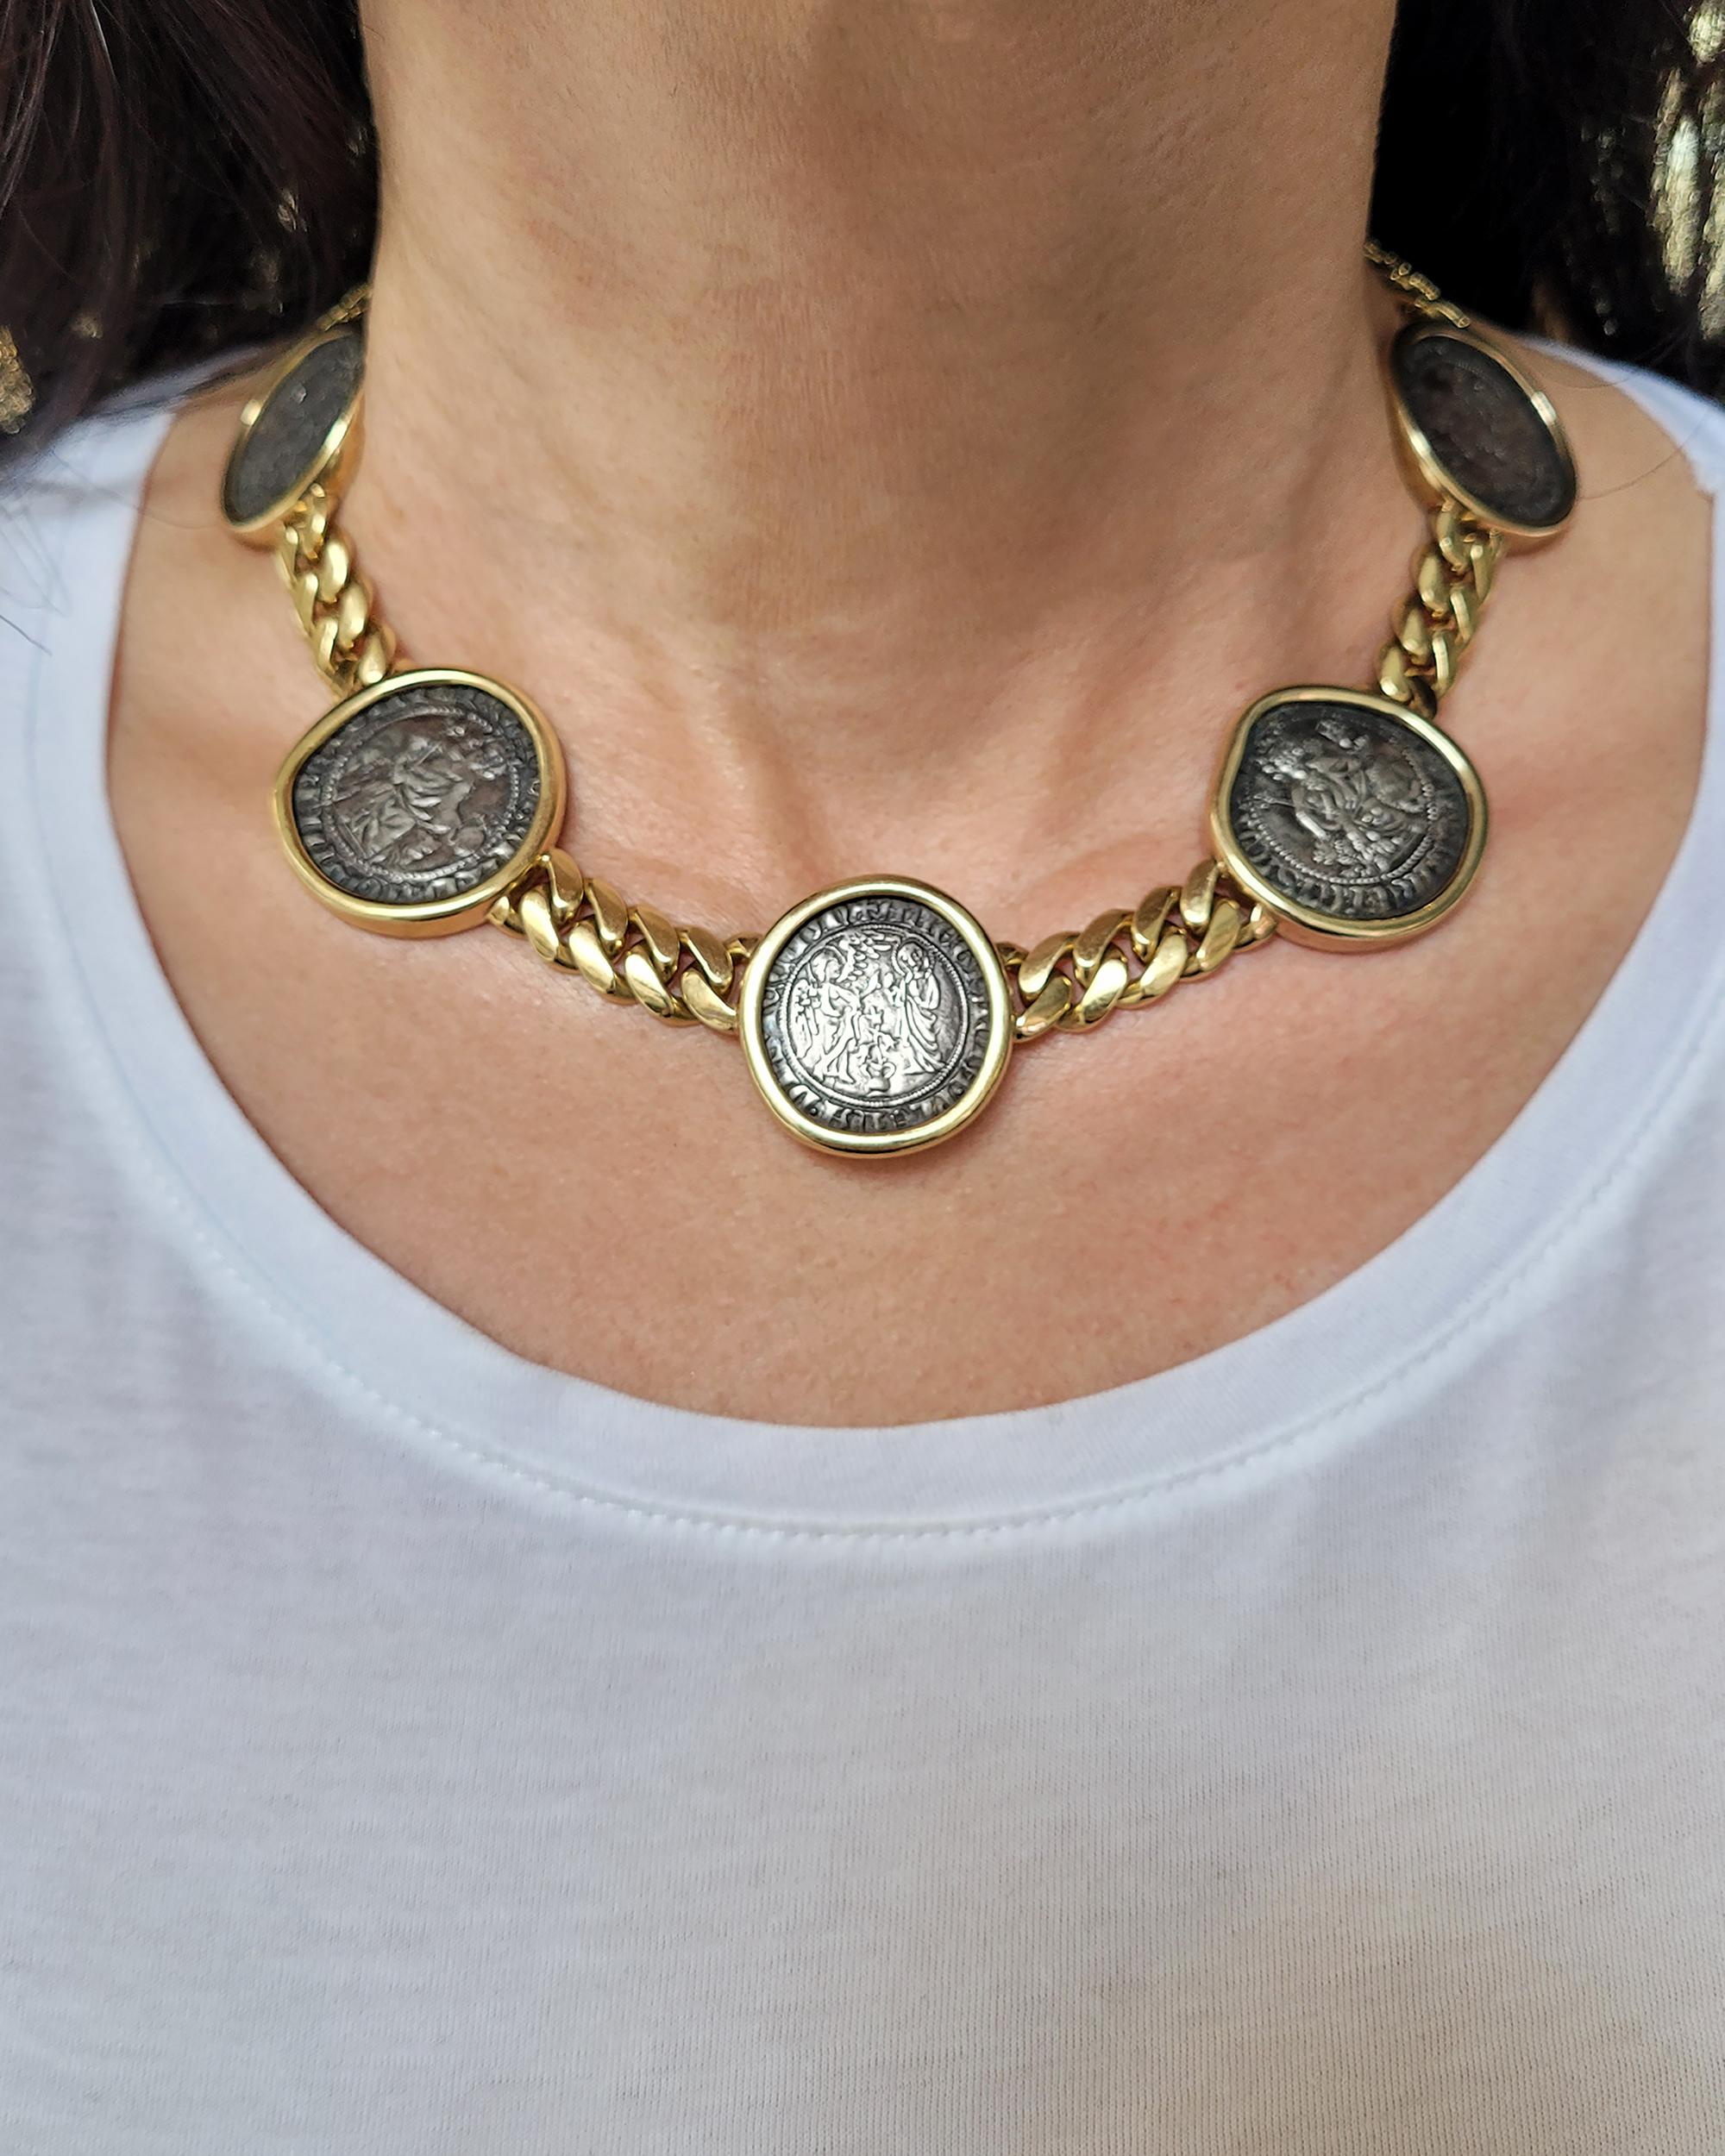 An iconic necklace comprising of 5 ancient Roman coins from the Bulgari's 'Monete' collection.
Metal is 18k yellow gold.
Weight of the necklace is 145.27 grams.
15.5 inches long.
Stamped Bulgari Italy. 
Circa 1980.